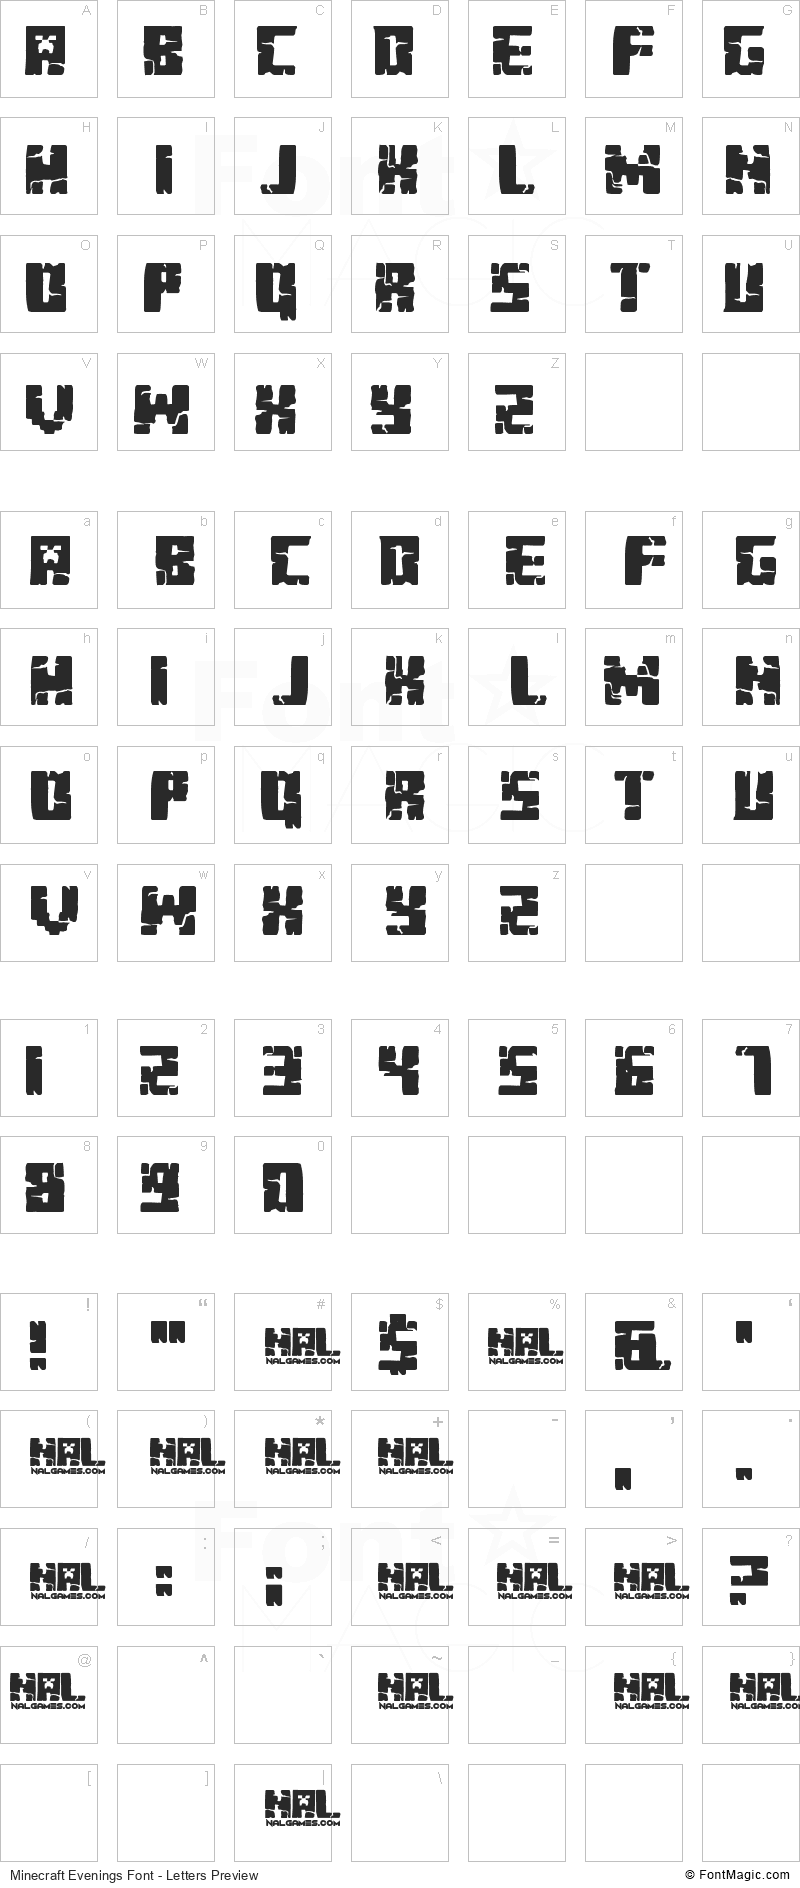 Minecraft Evenings Font - All Latters Preview Chart